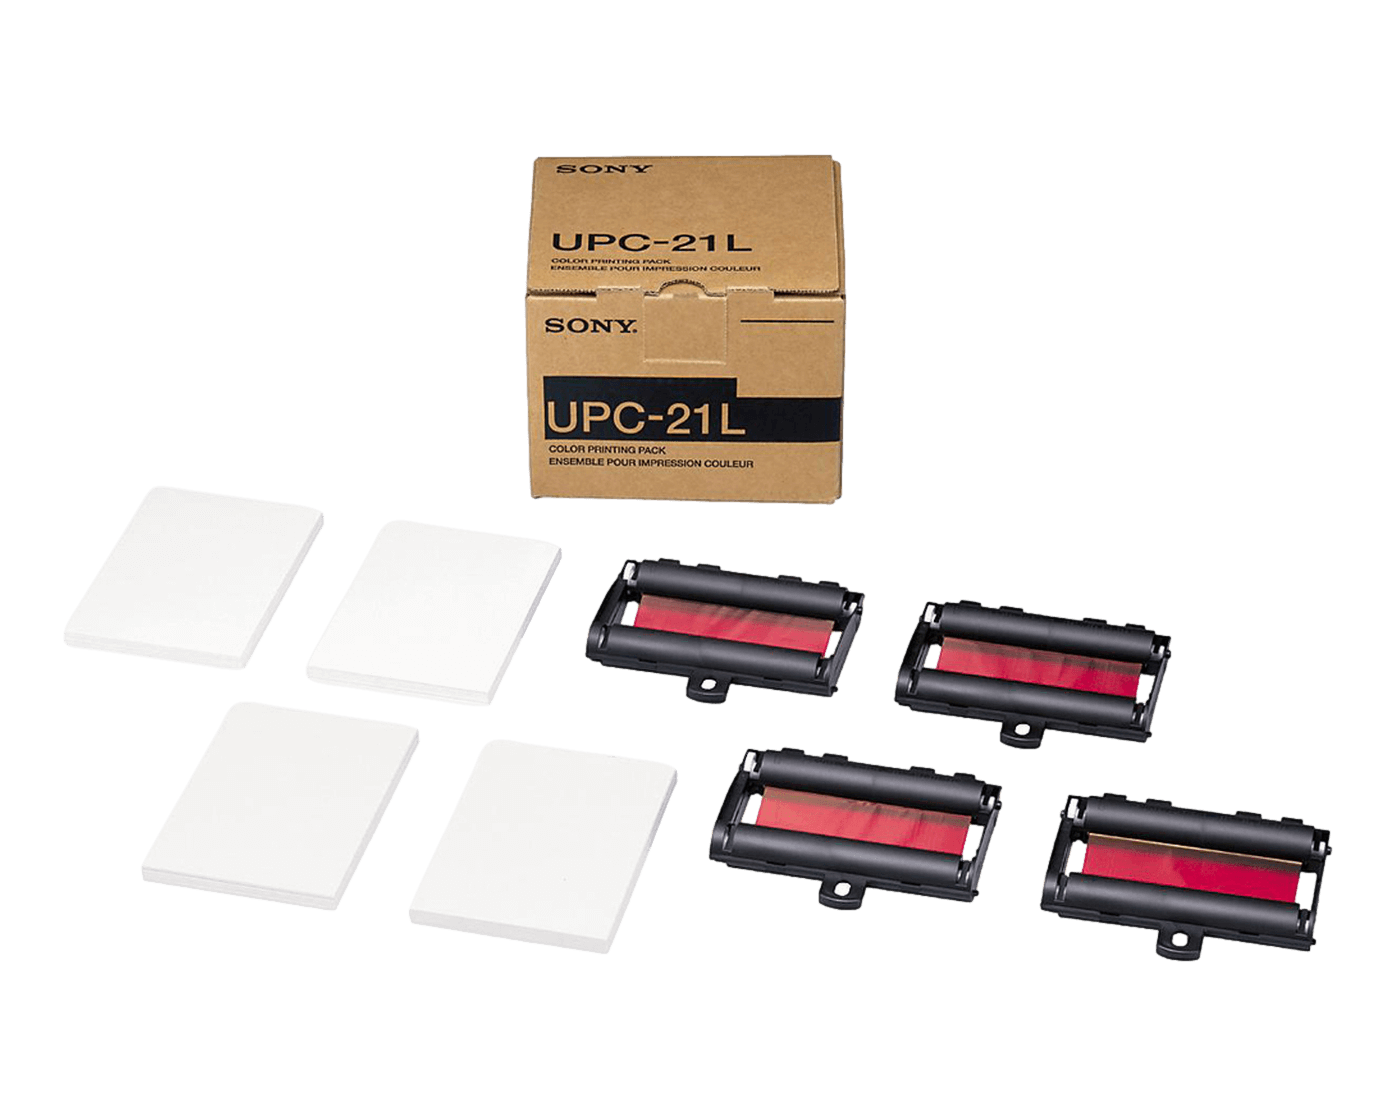 Sony UPC-21L Color Print Pack (Paper + ink ribbons) compatible with Sony printers